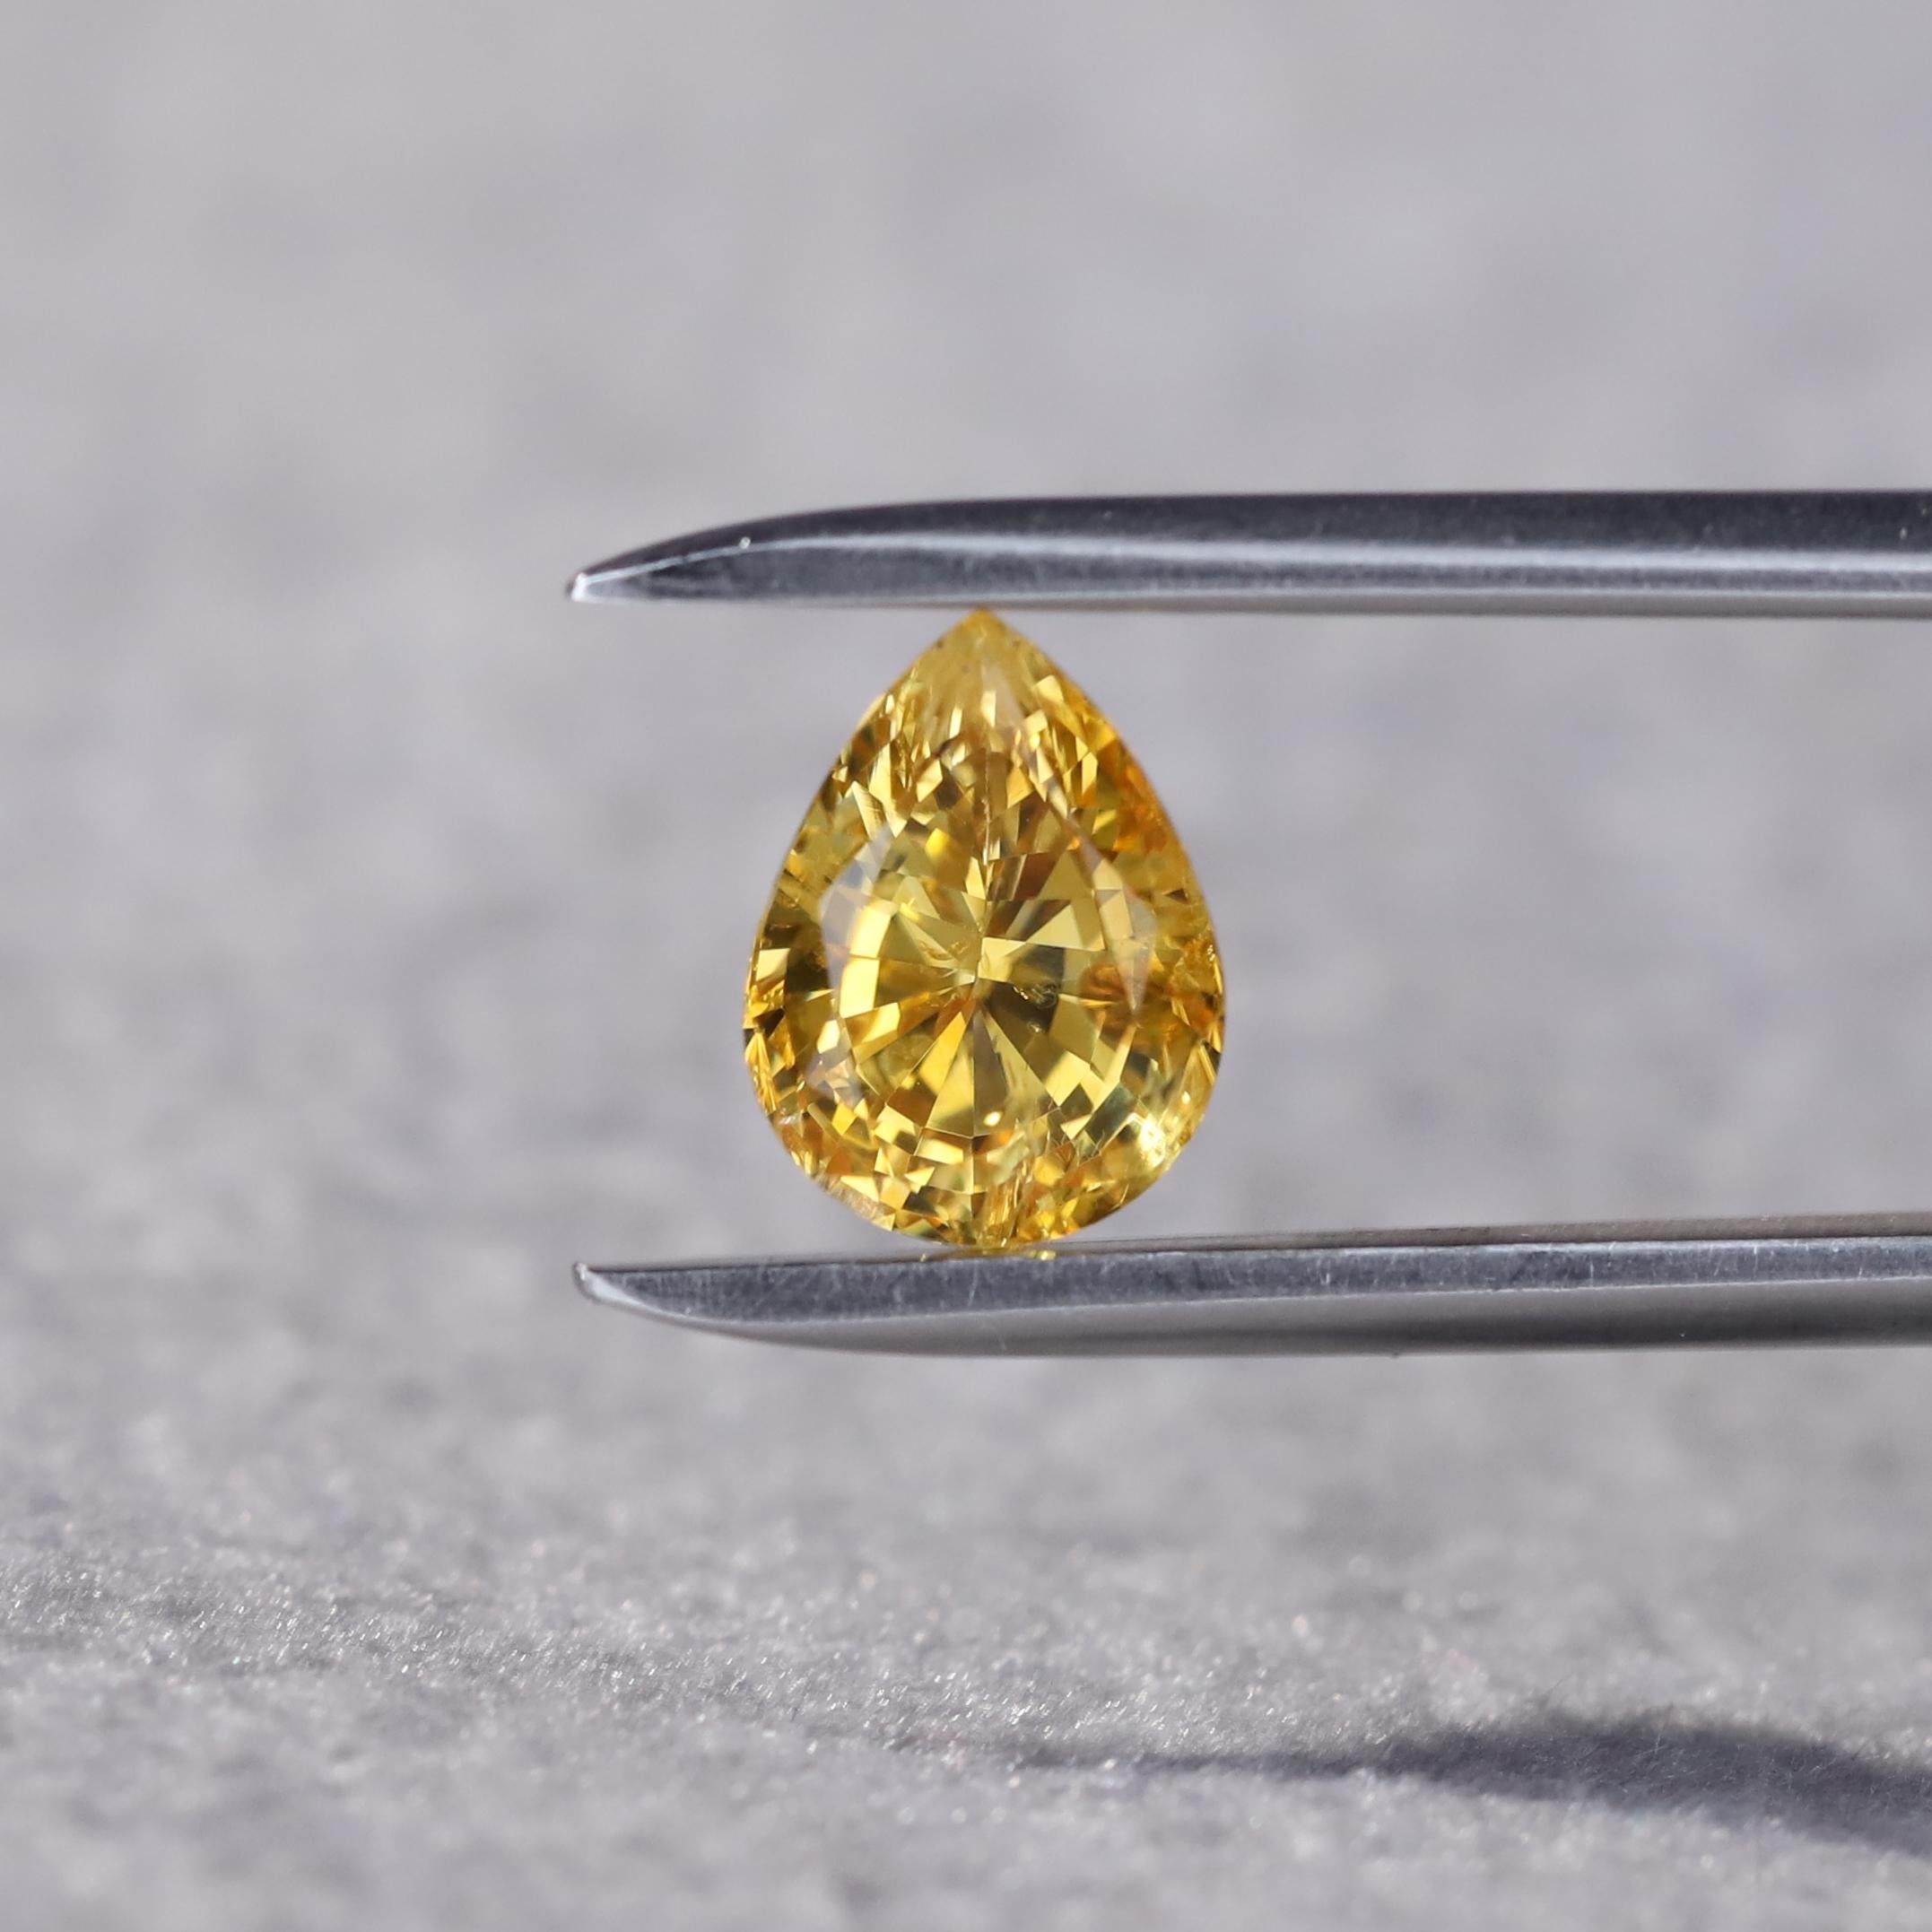 Women's 1.87 Carat Pear Cut Natural Golden Yellow Sapphire Loose Gemstone from Sri Lanka For Sale